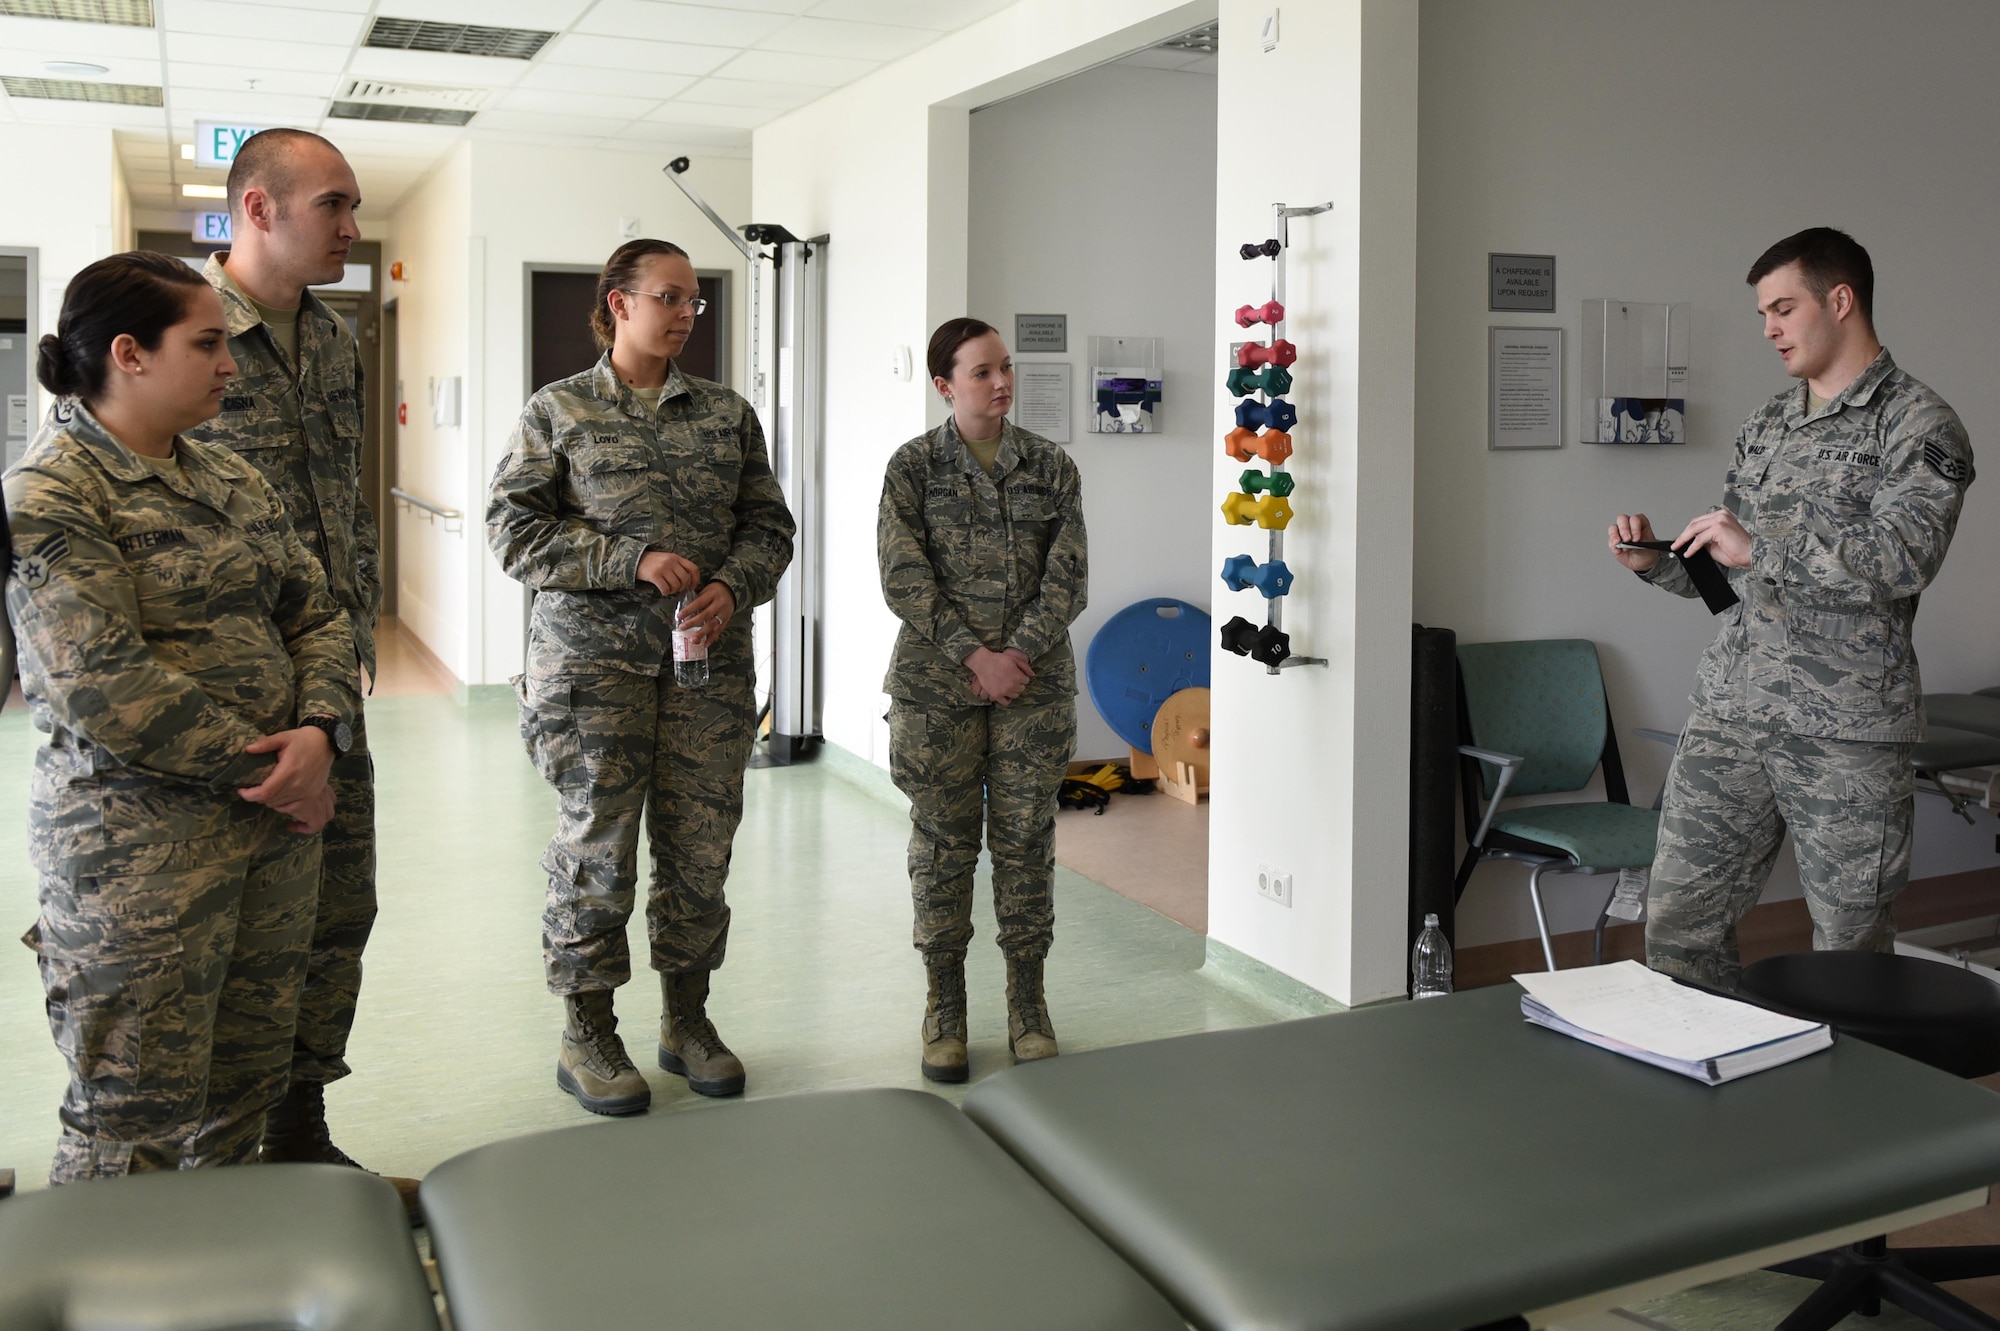 Staff Sgt. Daniel Dunwald, 52nd Medical Operations Squadron physical therapy technician and certified kinesio tape practitioner, teaches others the benefits of using k-tape during the recent medical group training day at Spangdahlem Air Base, Germany, April 20, 2017. Kinesio taping is a procedure intended to decrease pain and inflammation, stimulate blood and lymph circulation, aid postural correction, enhance athletic performance and prevent musculoskeletal injuries. (U.S. Air Force photo by Tech. Sgt. Staci Miller)